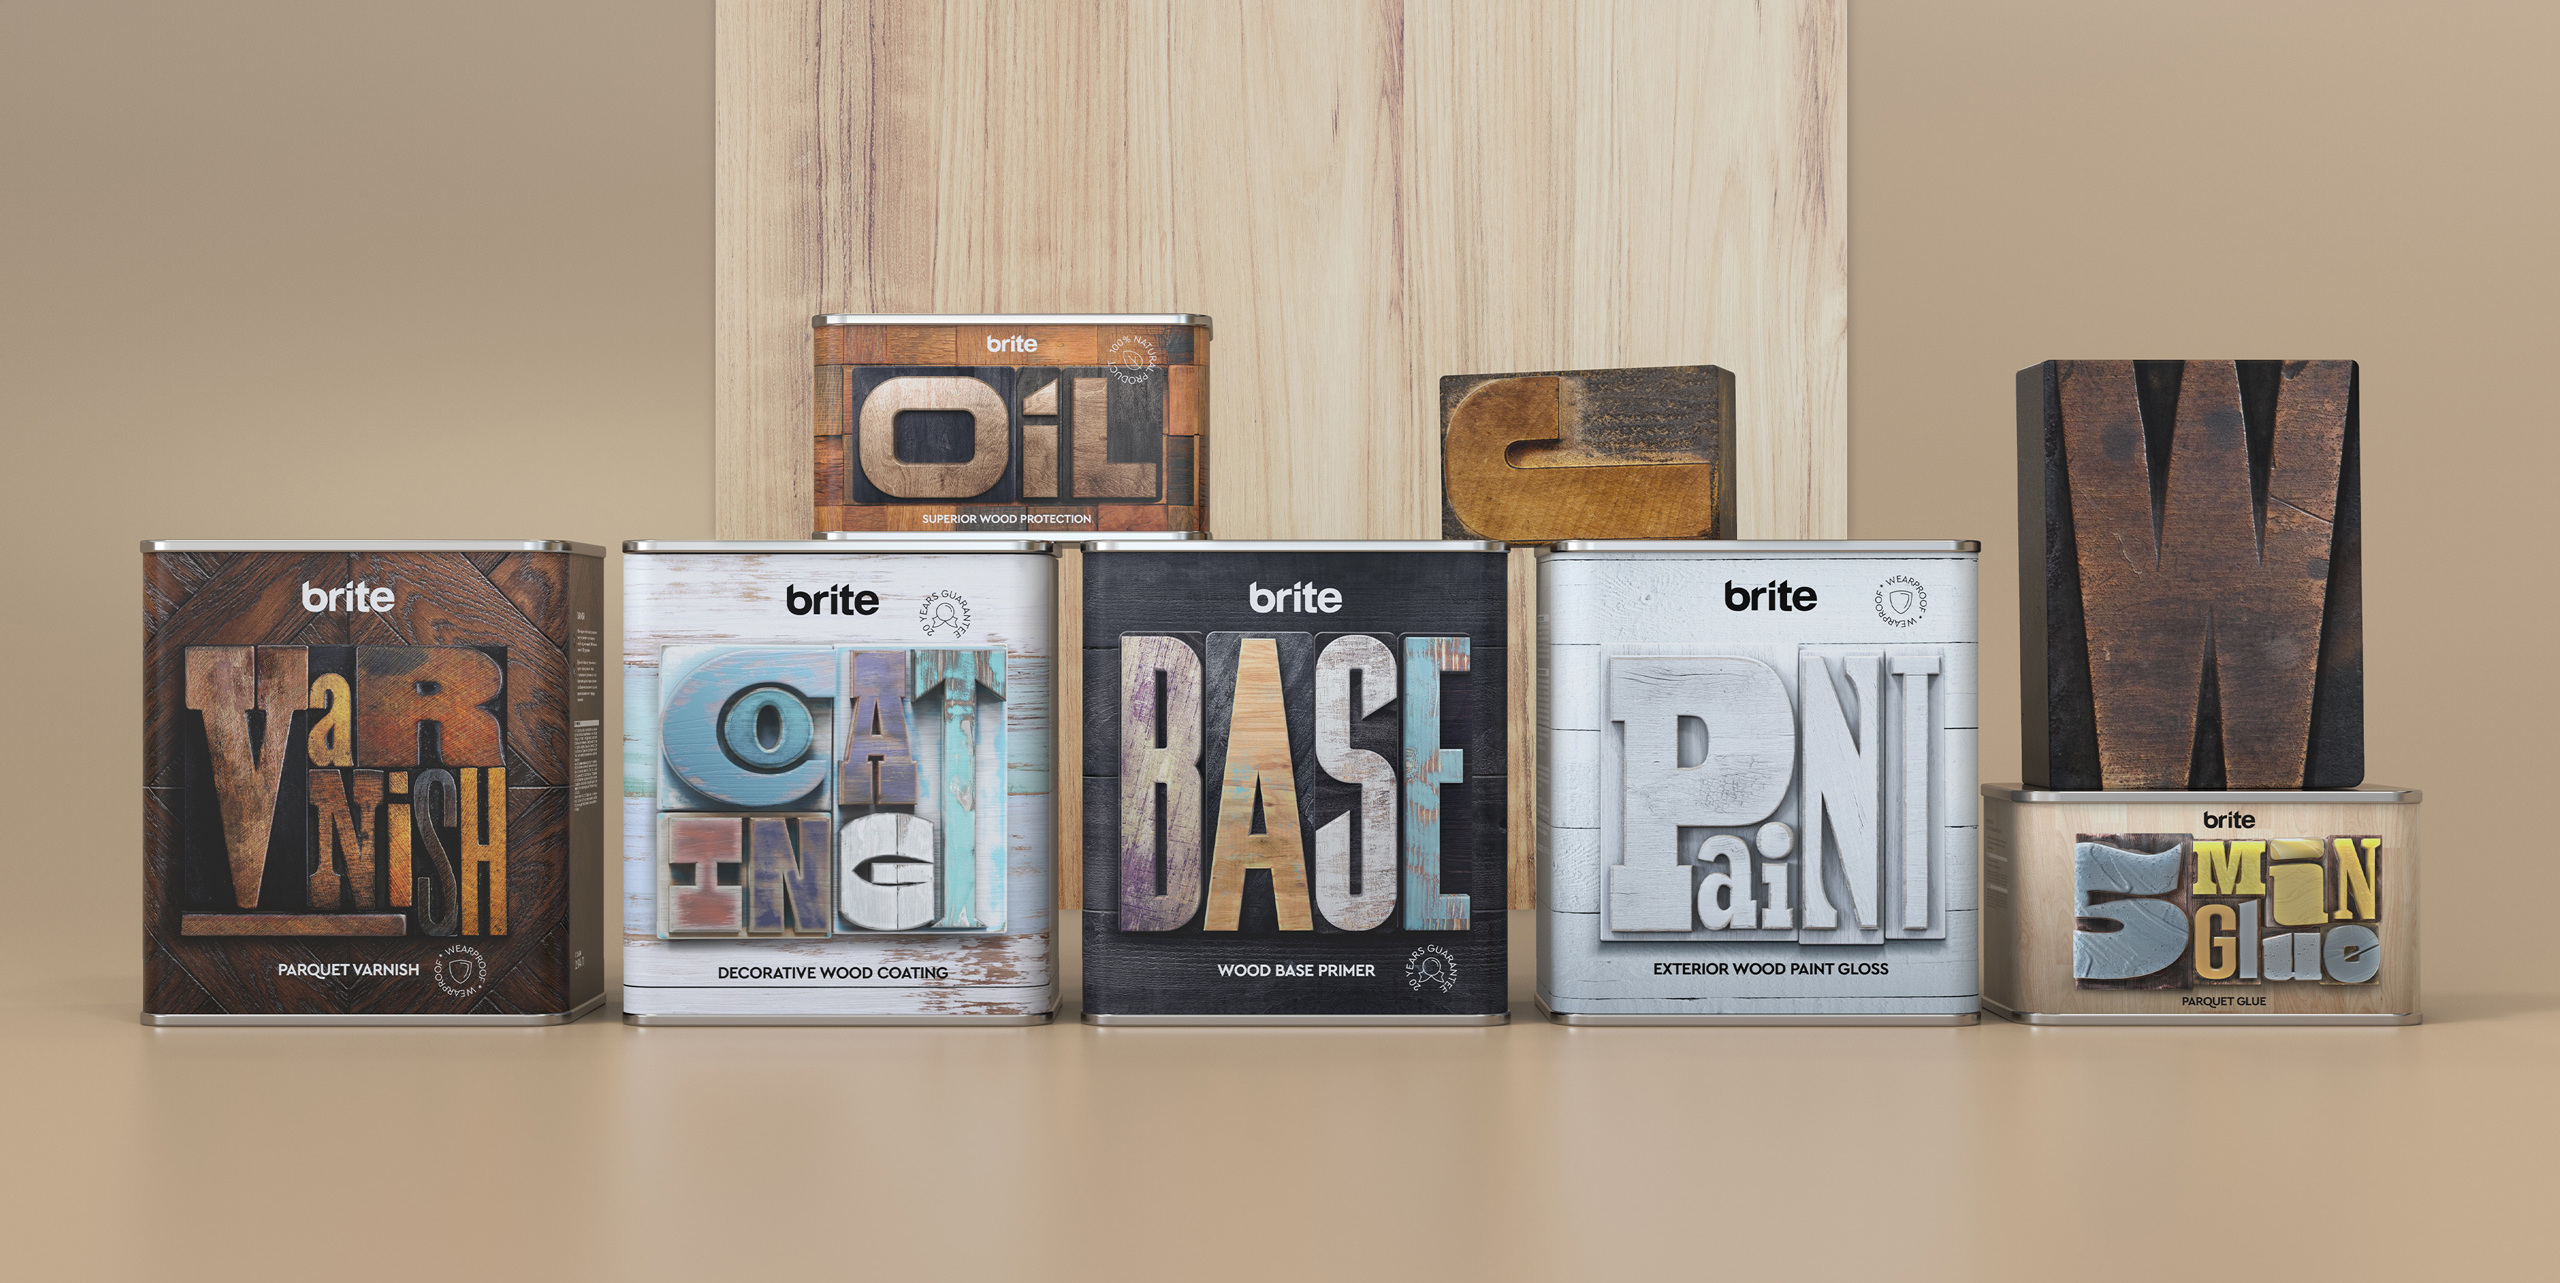 Depot team created a distinctive packaging design for the brand Brite that will not only help the consumer choose the right product, but also highlight the brand’s passion for wood.